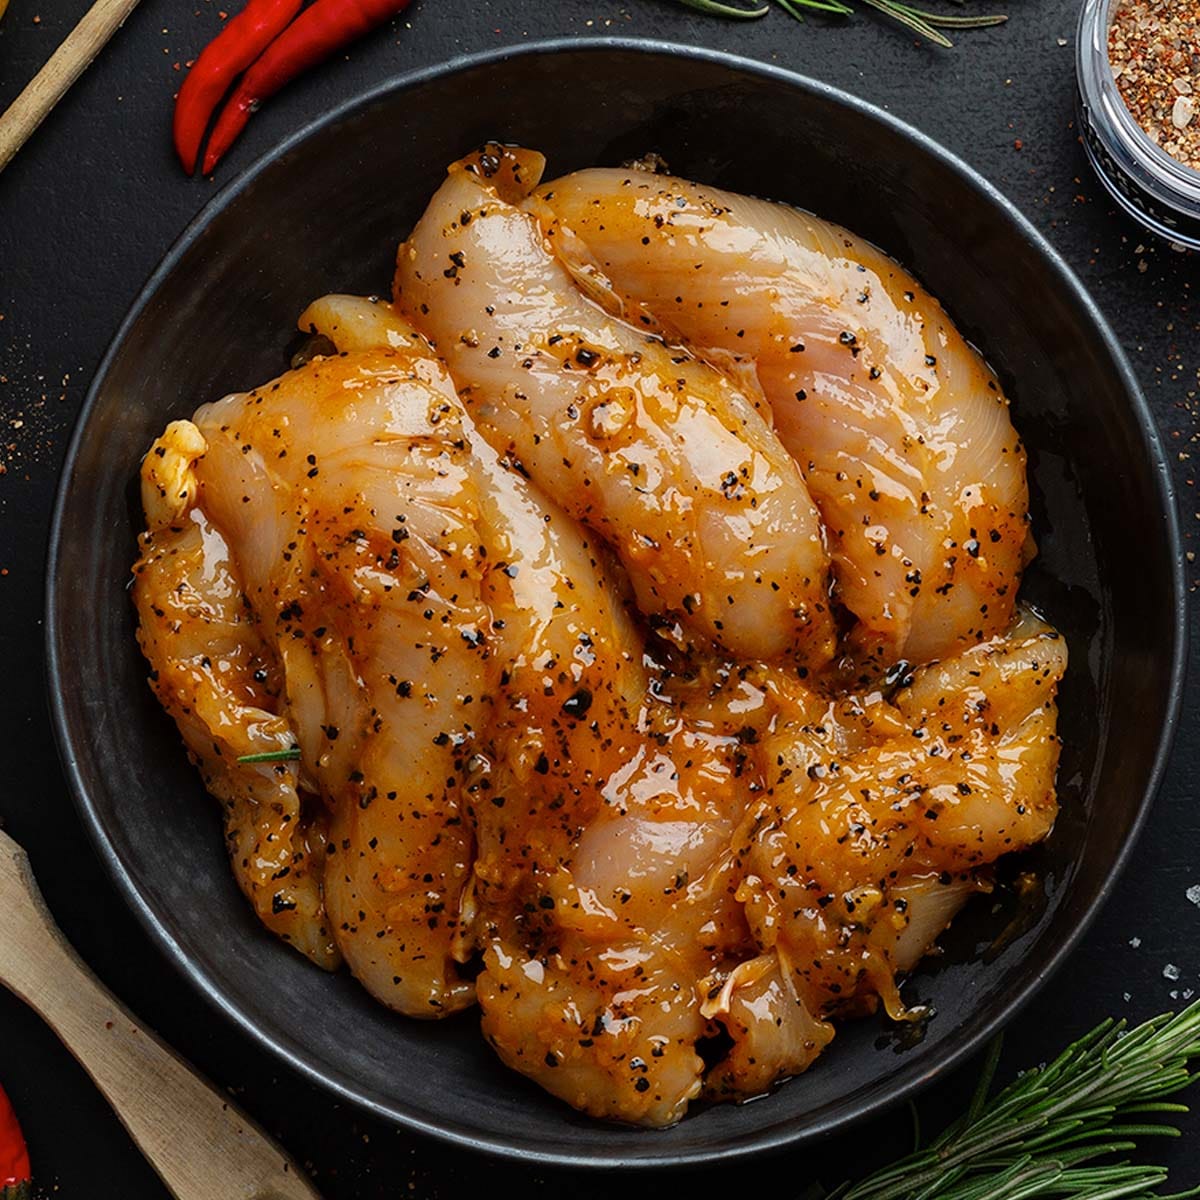 An easier way to make a chicken sparkle is by using a marinade. But how long can chicken marinate in the fridge before it goes bad?